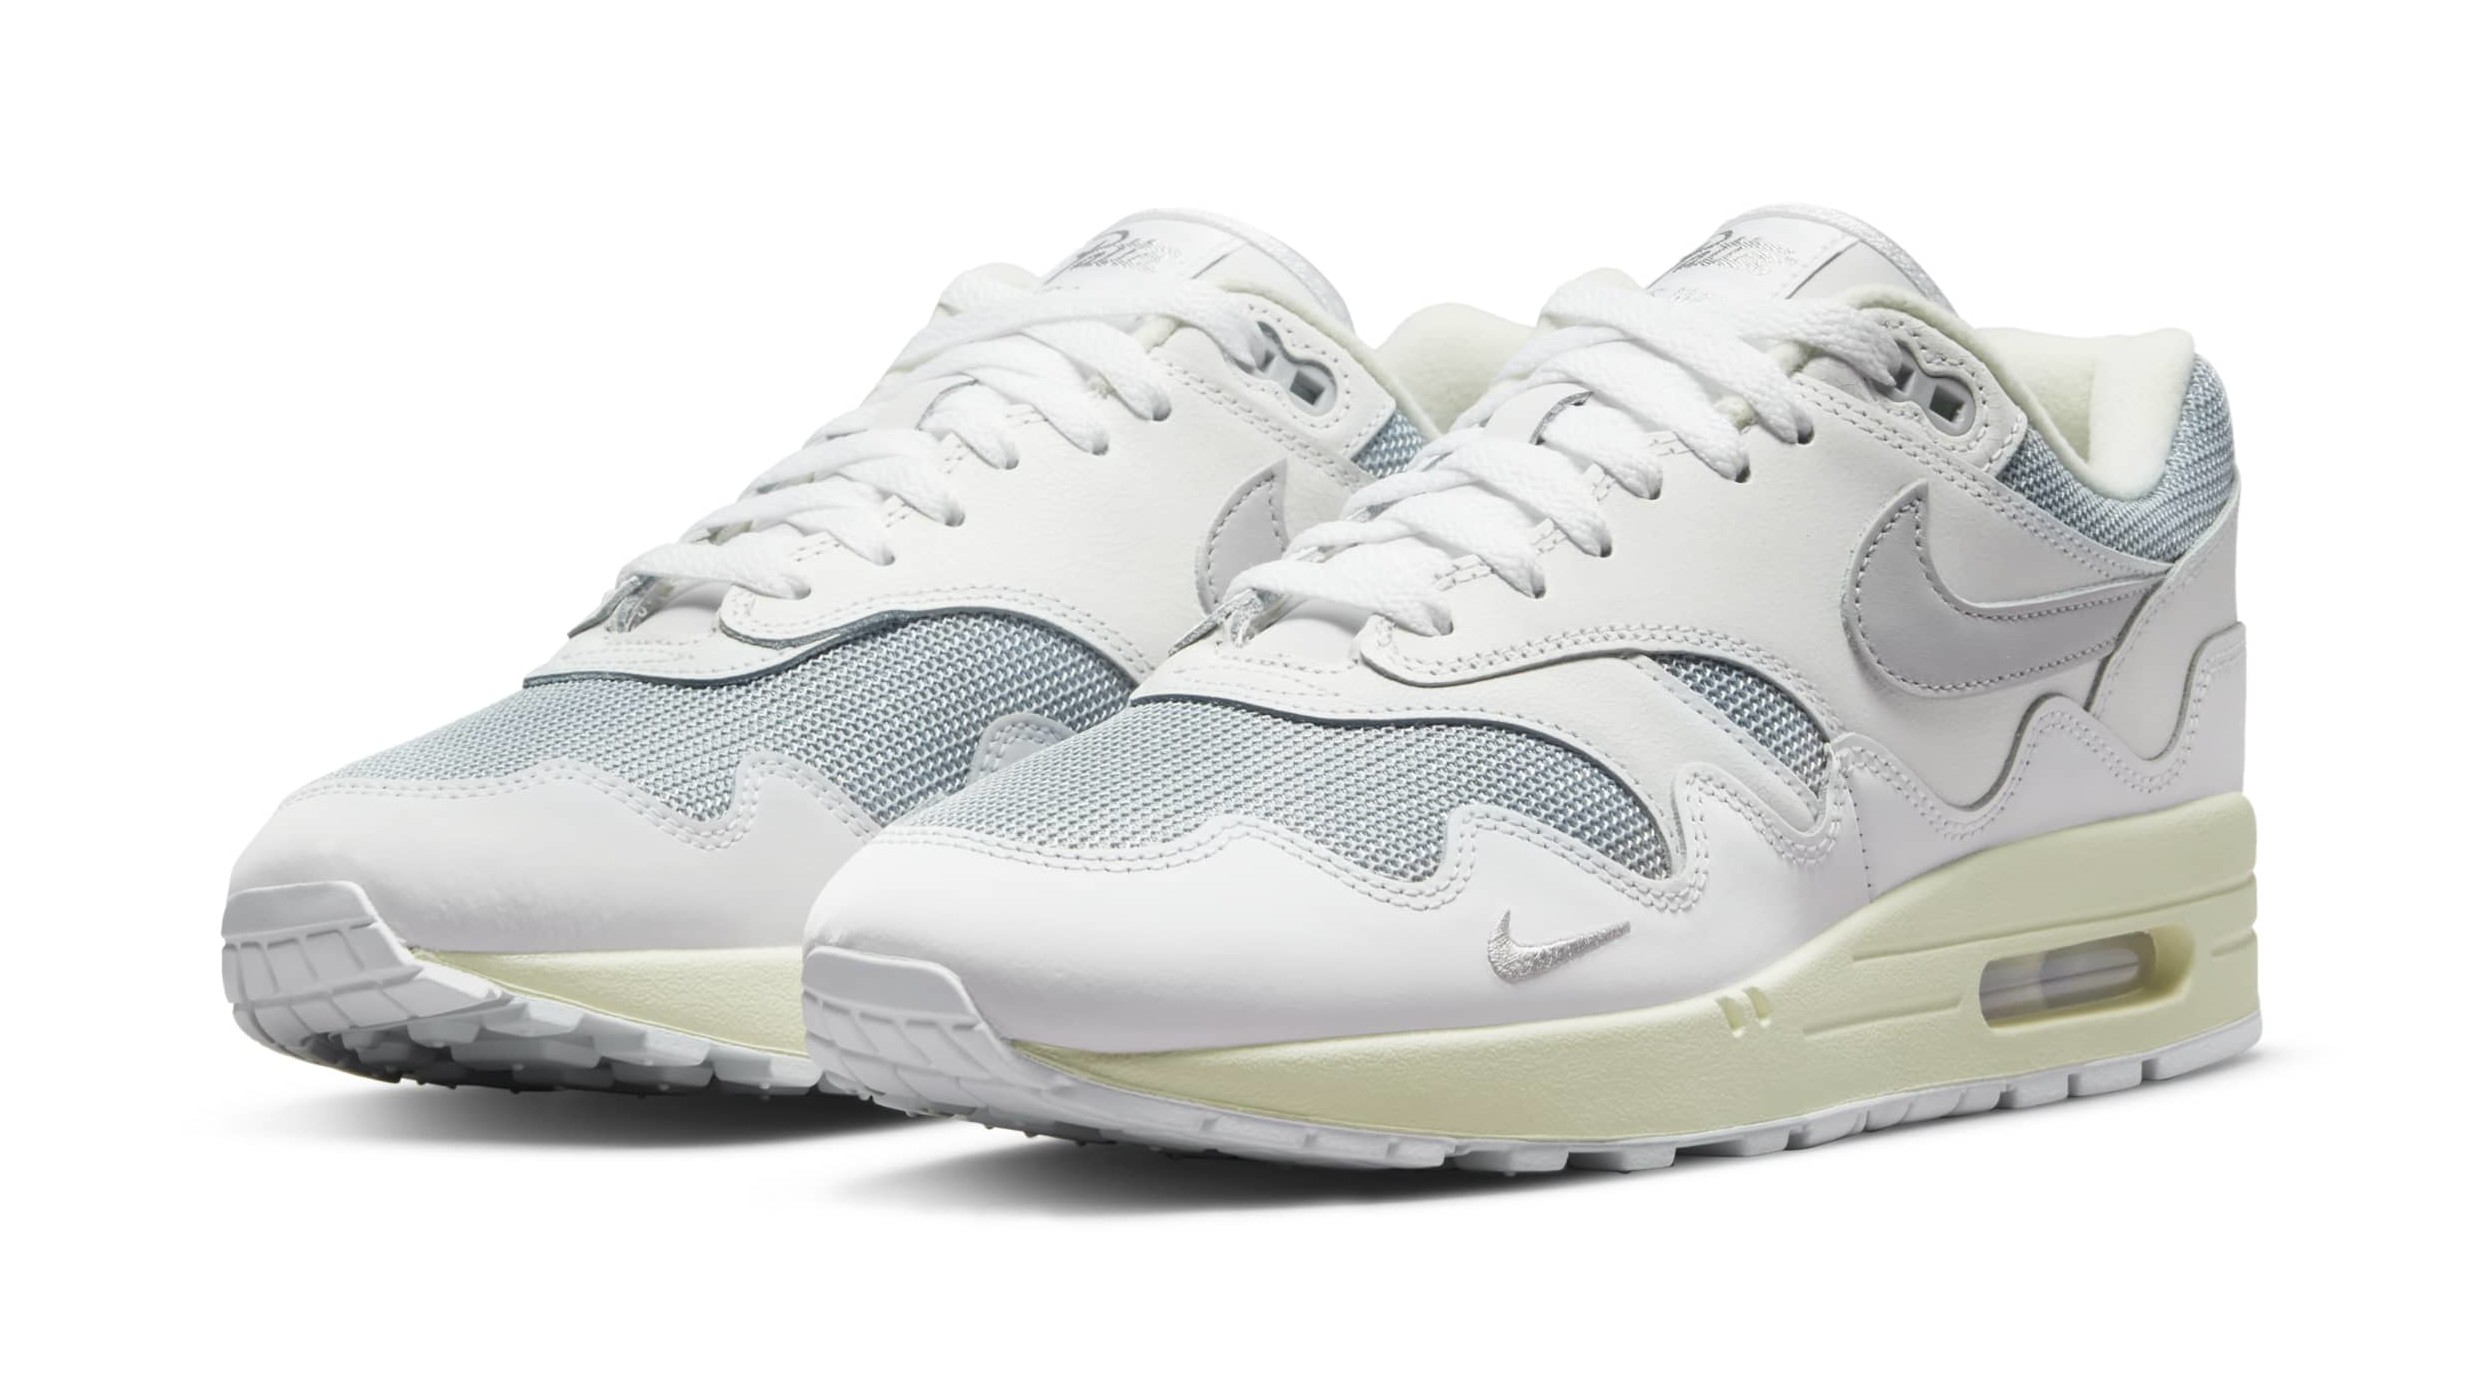 Patta's 'Pure Platinum' Nike Air Max 1 Collab Releases This Week ...